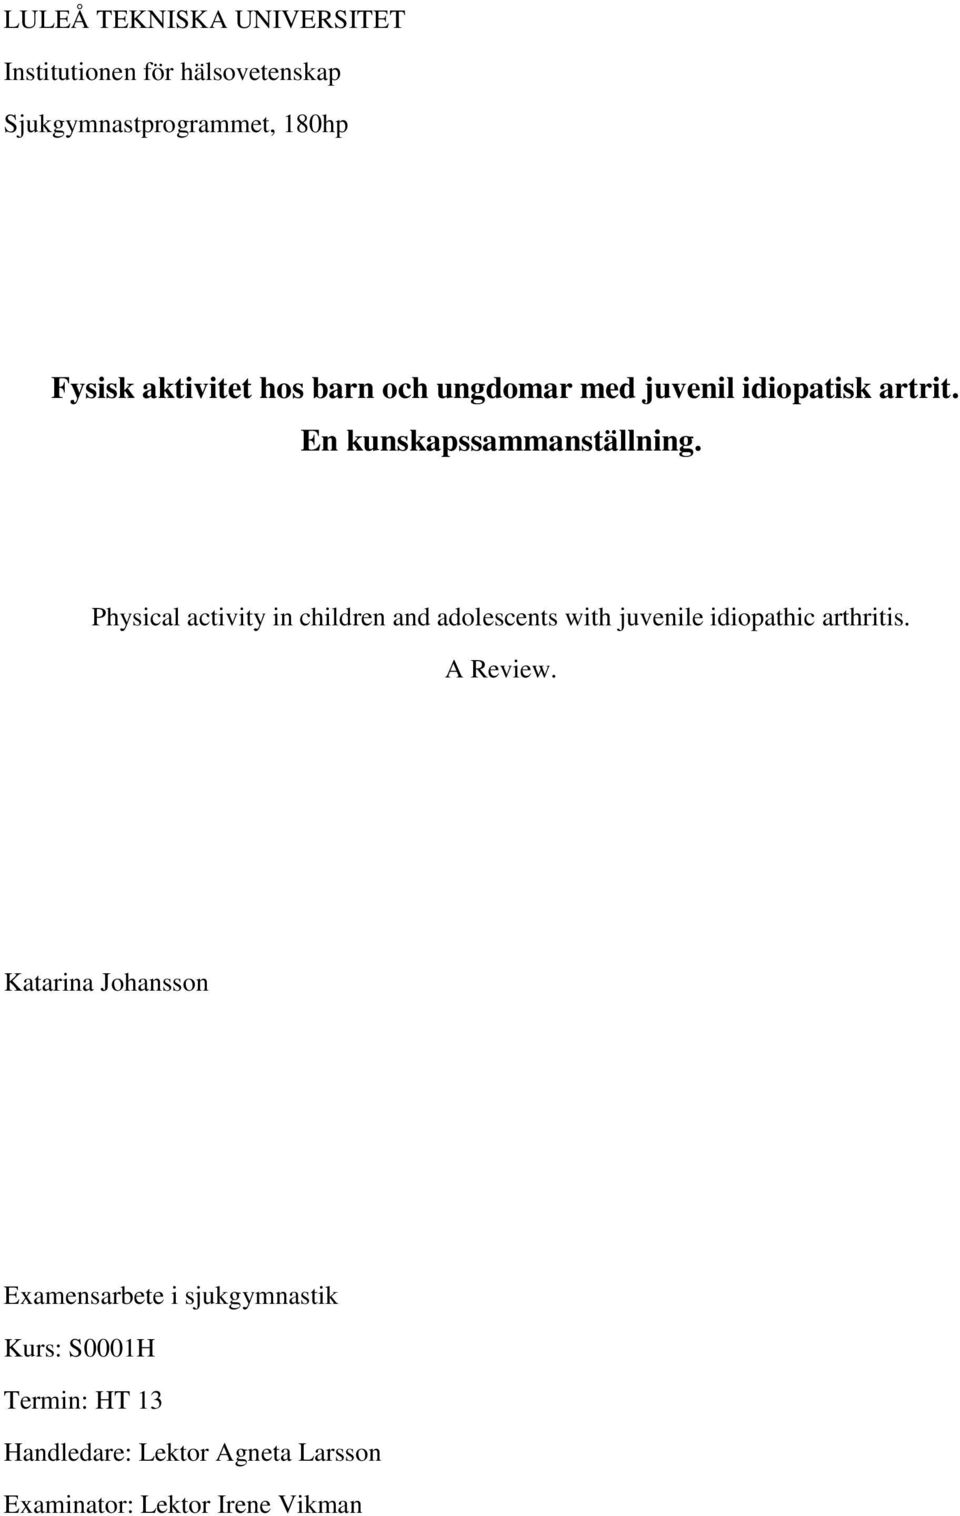 Physical activity in children and adolescents with juvenile idiopathic arthritis. A Review.